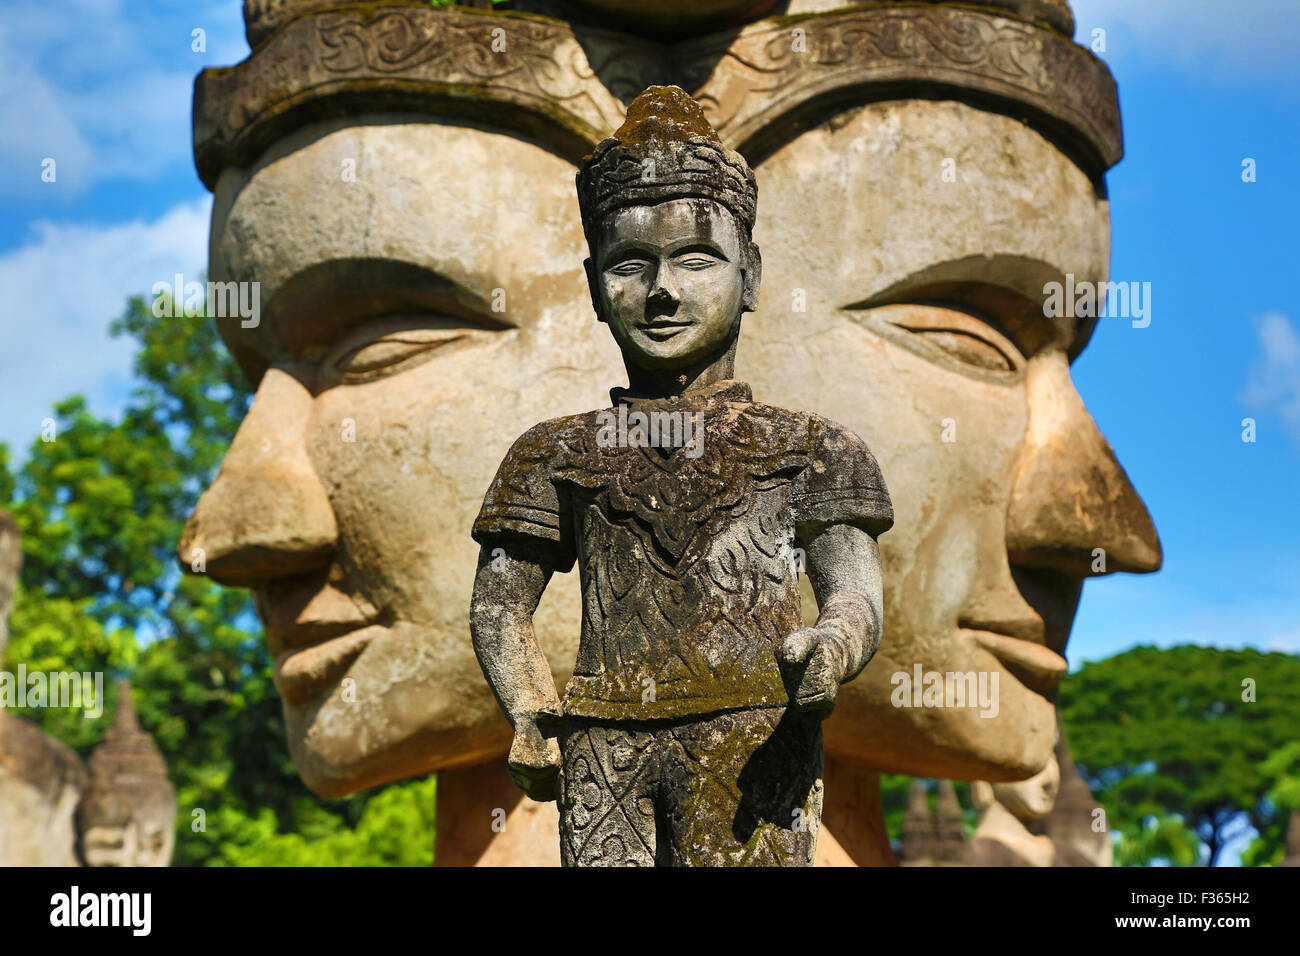 Statues of Buddha heads and faces at the Buddha Park, Vientiane, Laos Stock Photo